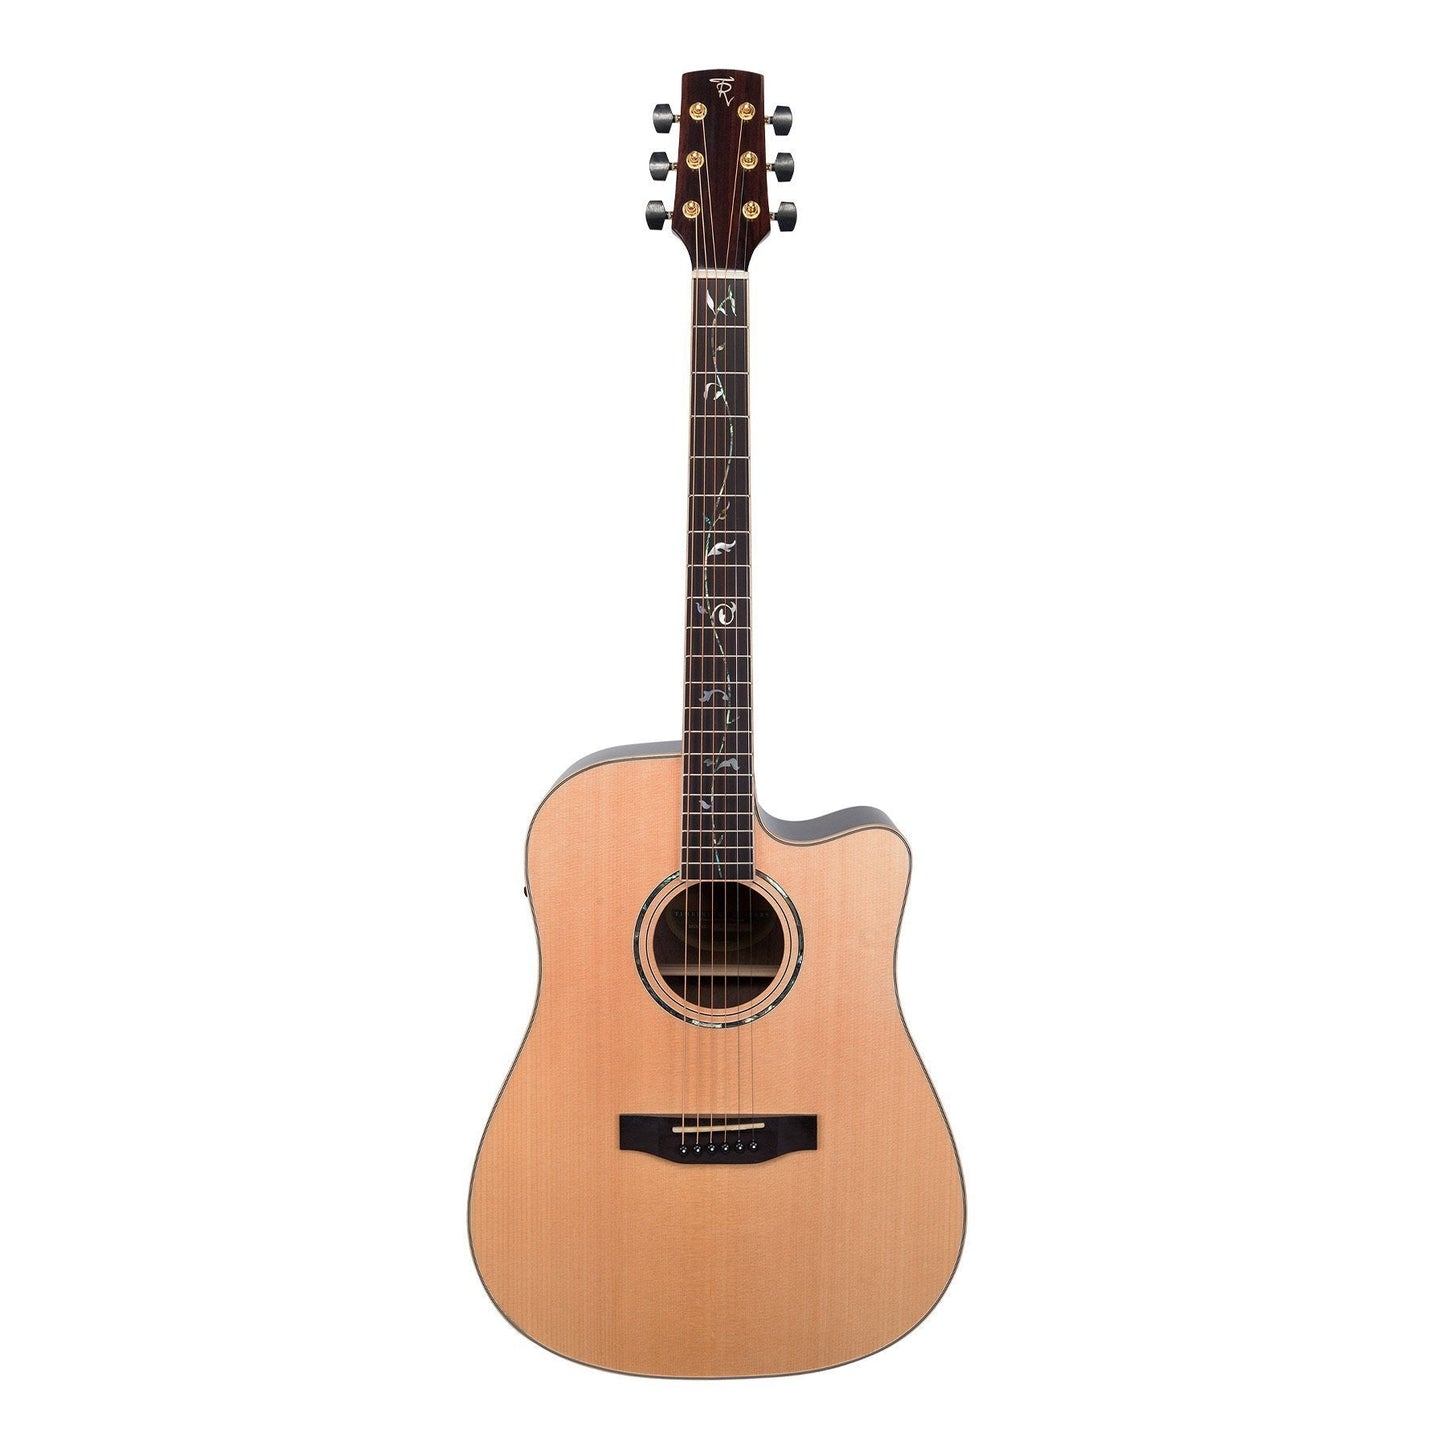 Timberidge '3 Series' Spruce Solid Top Acoustic-Electric Dreadnought Cutaway Guitar with 'Tree of Life' Inlay (Natural Gloss)